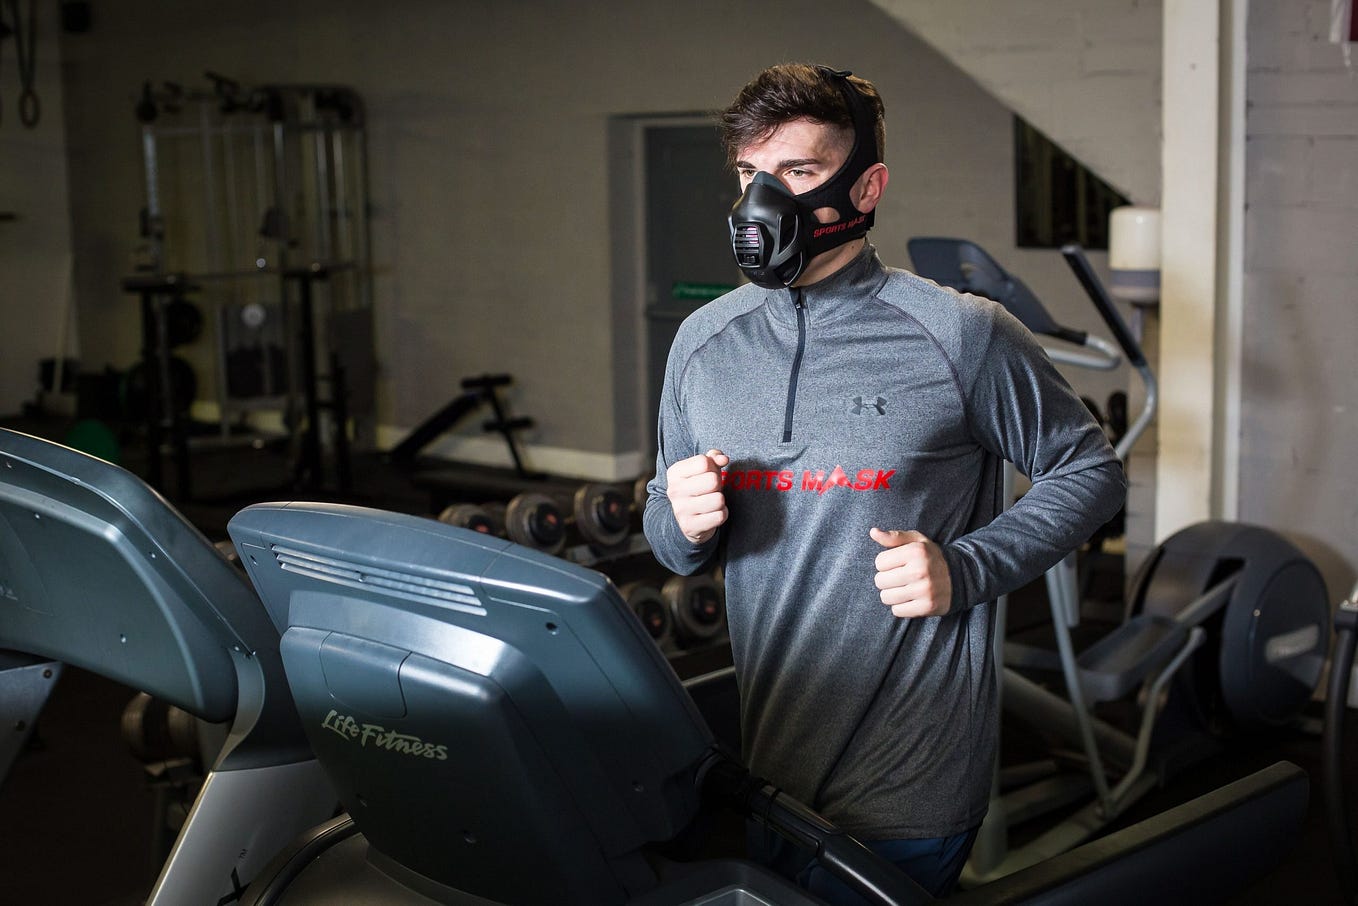 Training (Workout) Mask And High Altitude Benefits